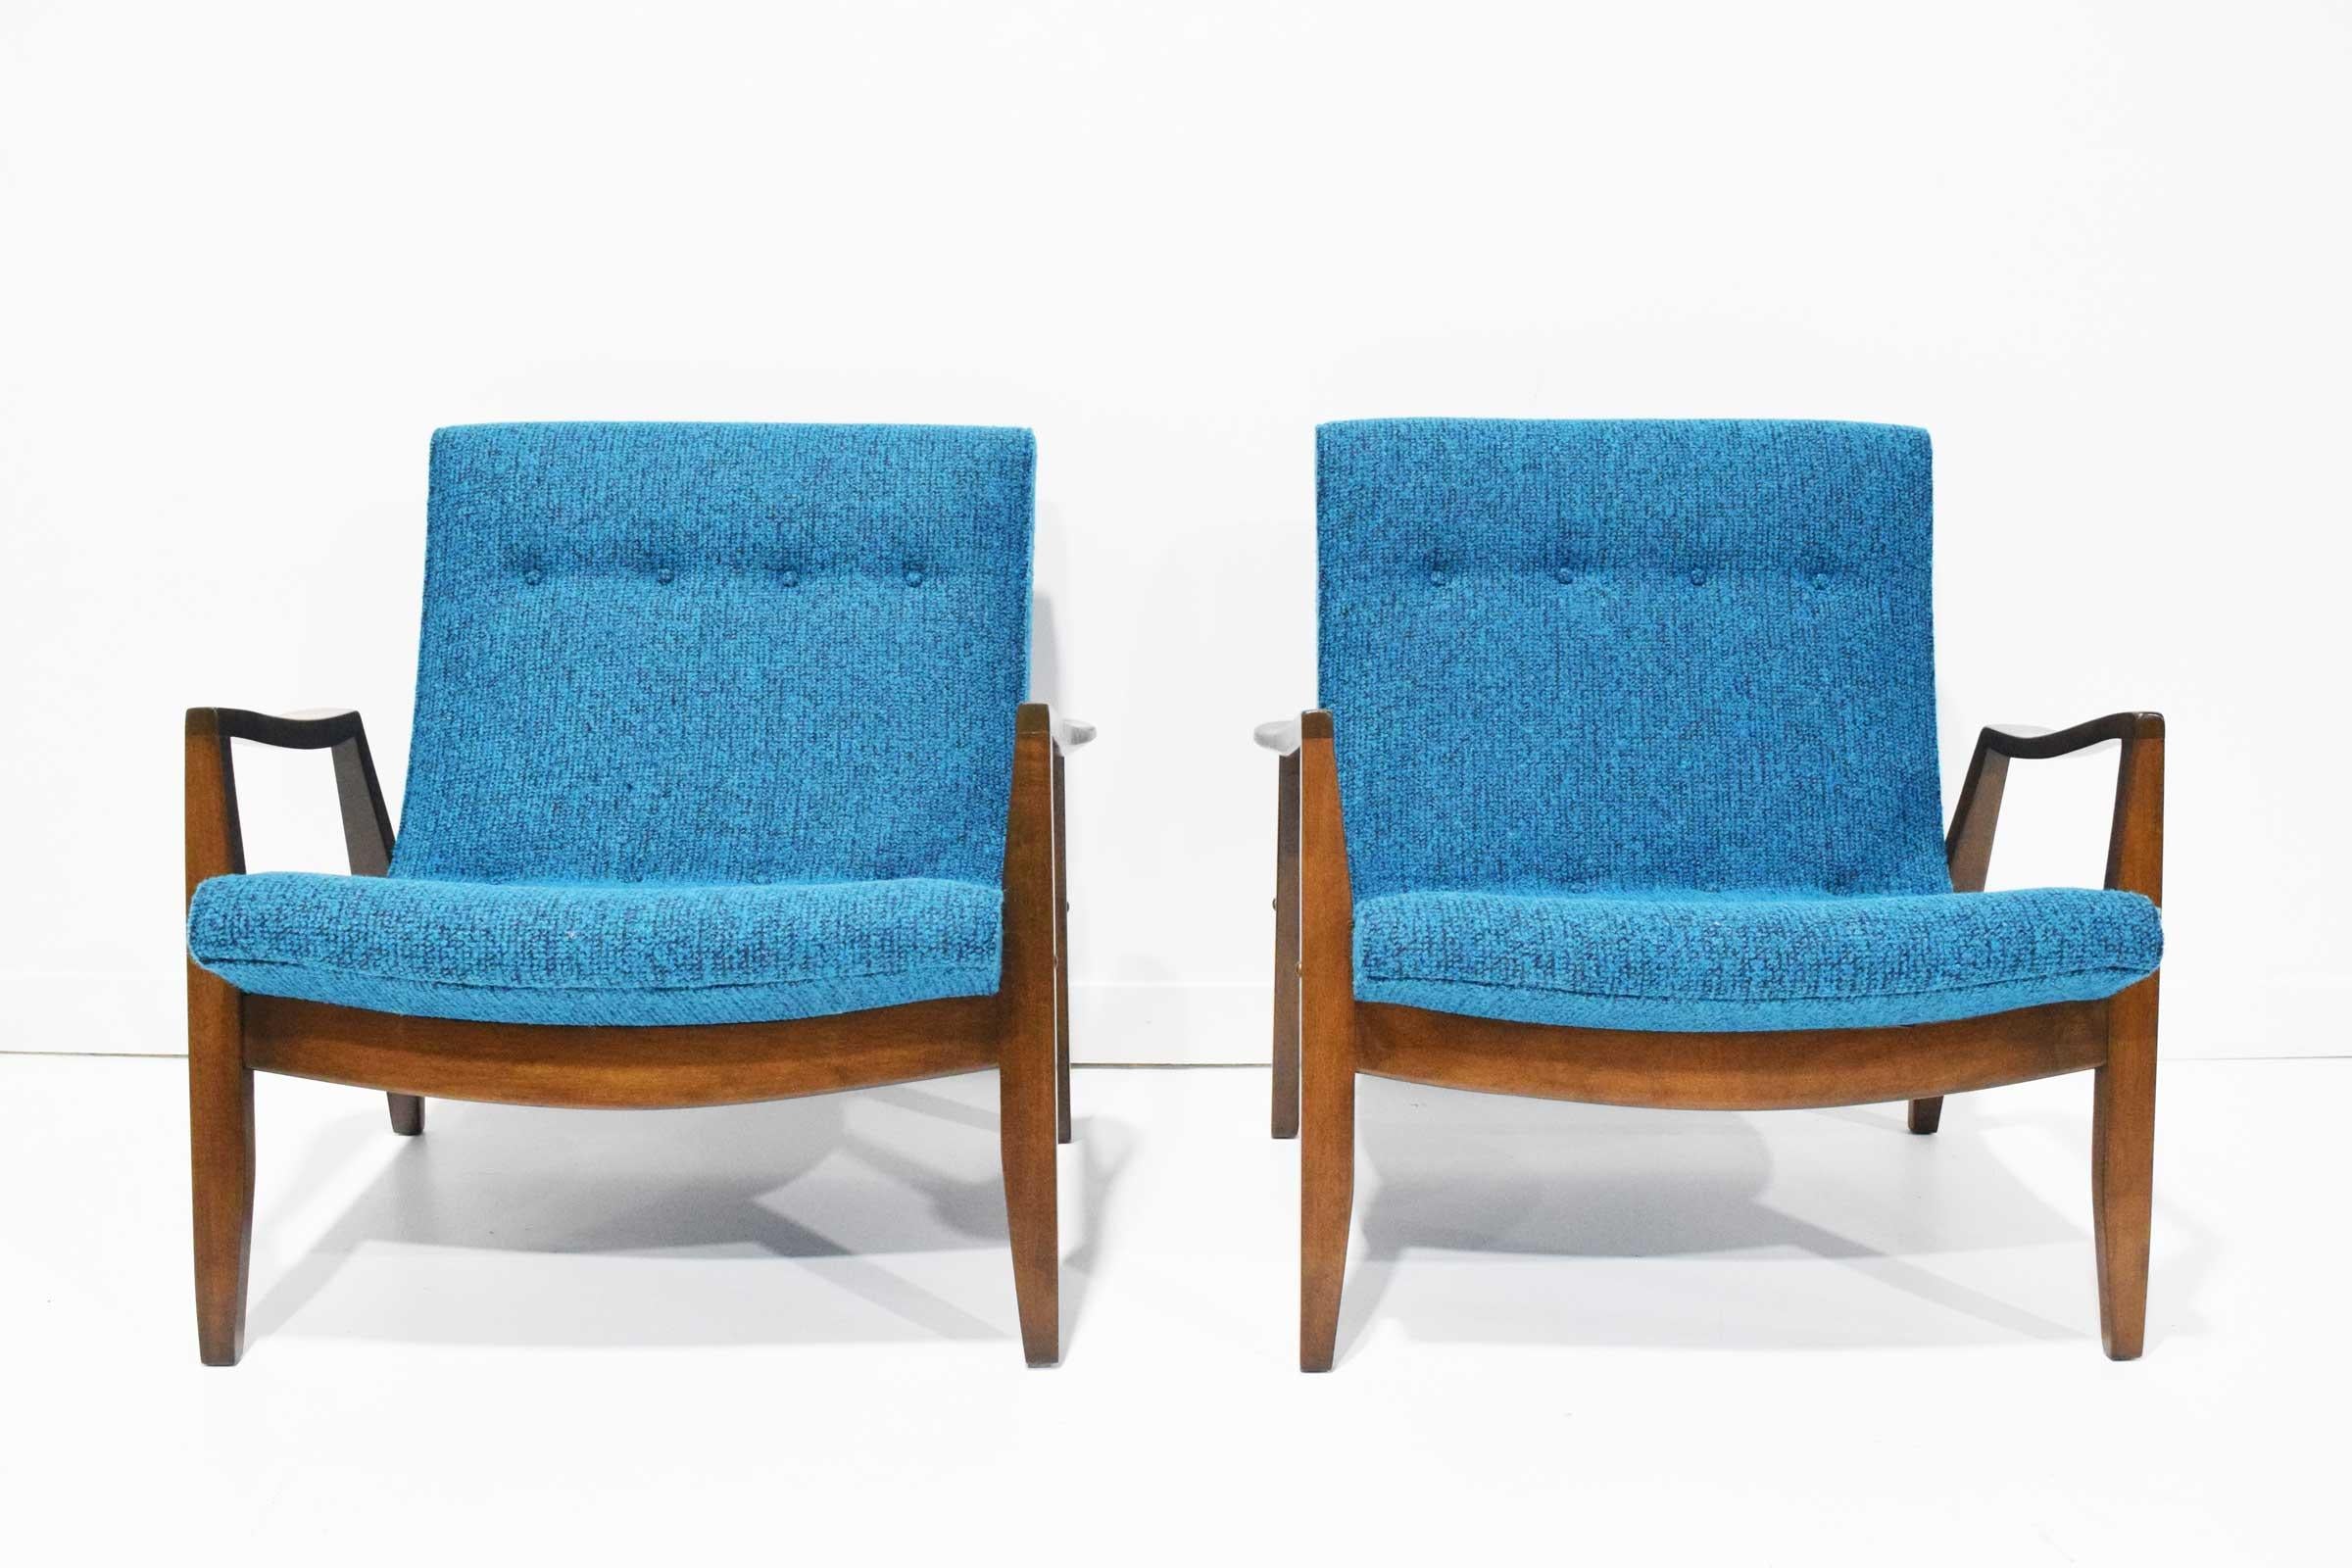 Fresh and ready to go. These chairs have been restored. Upholstery is a Knoll fabric in bright blue.